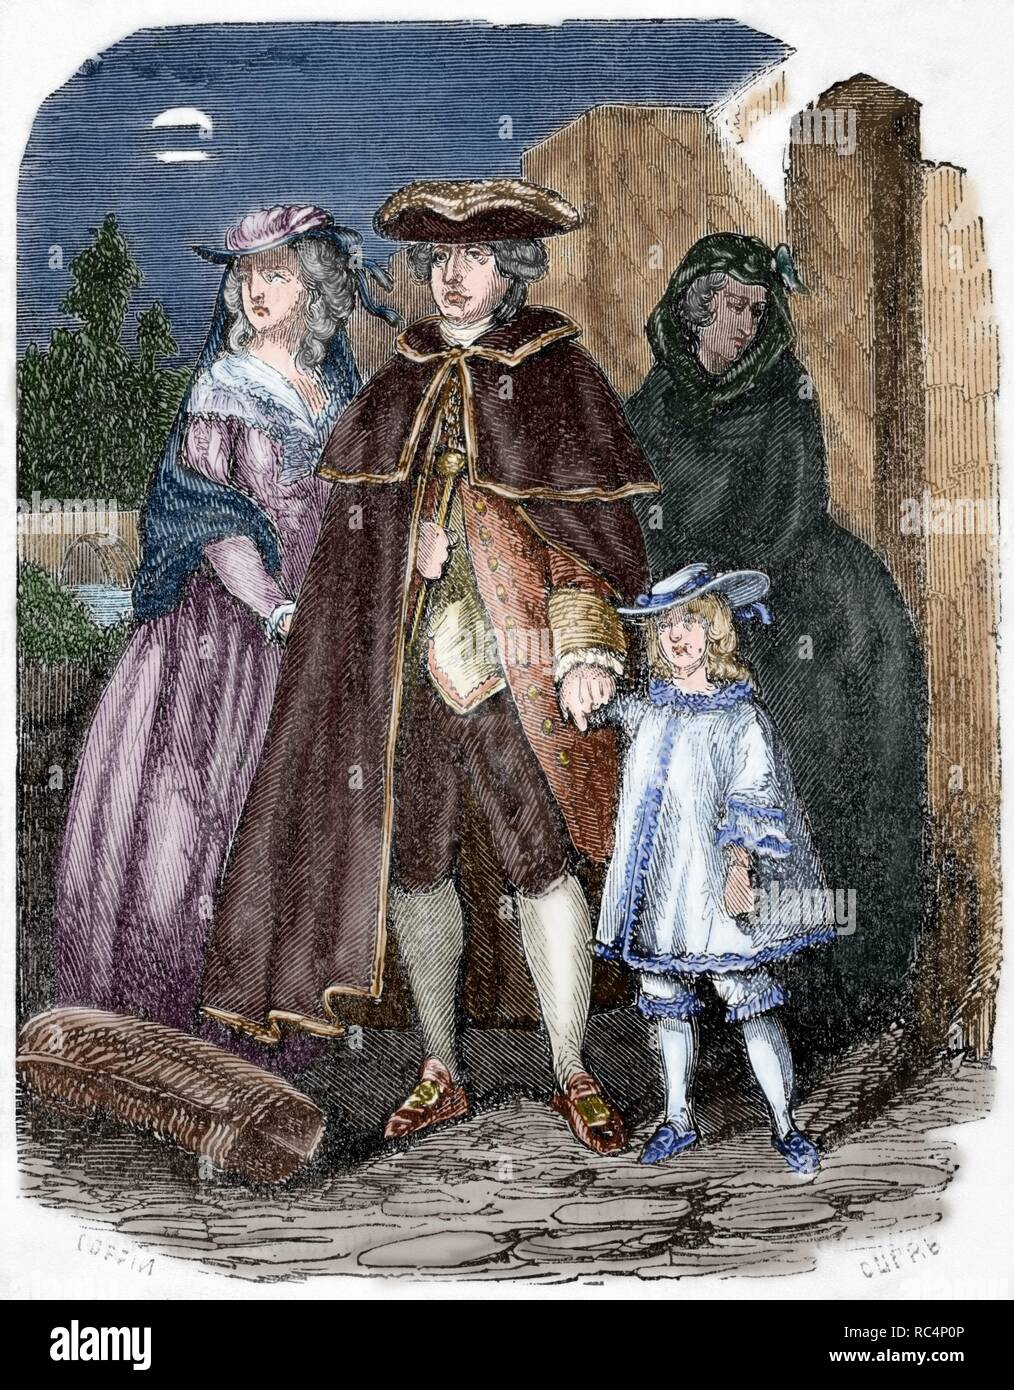 French Revolution (1789-1799). Escape of Louis XVI (1754-1793) and his family, 1791. Engraving by Dupre. Universal Library. Popular editions, 1851. Colored. Stock Photo